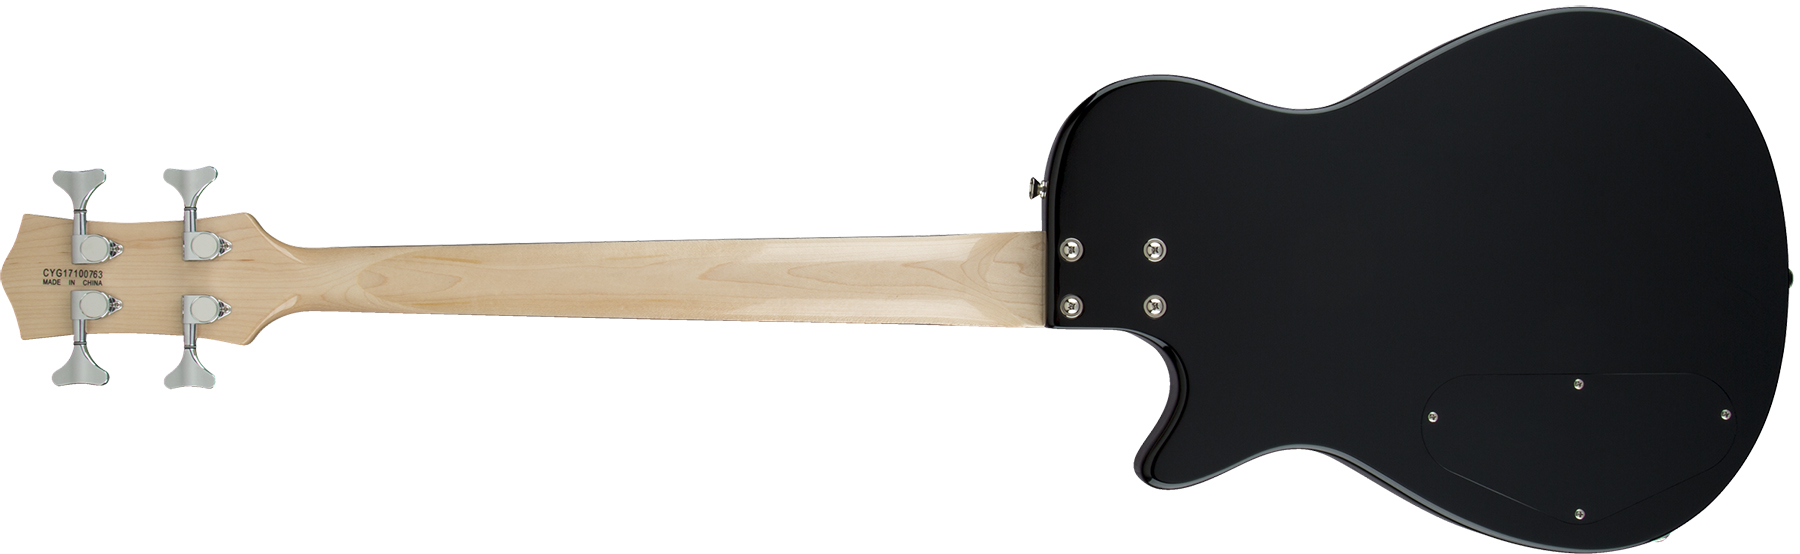 Gretsch G2220 Electromatic Junior Jet Bass Ii Short-scale 2019 Hh Wal - Black - Basse Électrique Solid Body - Variation 1